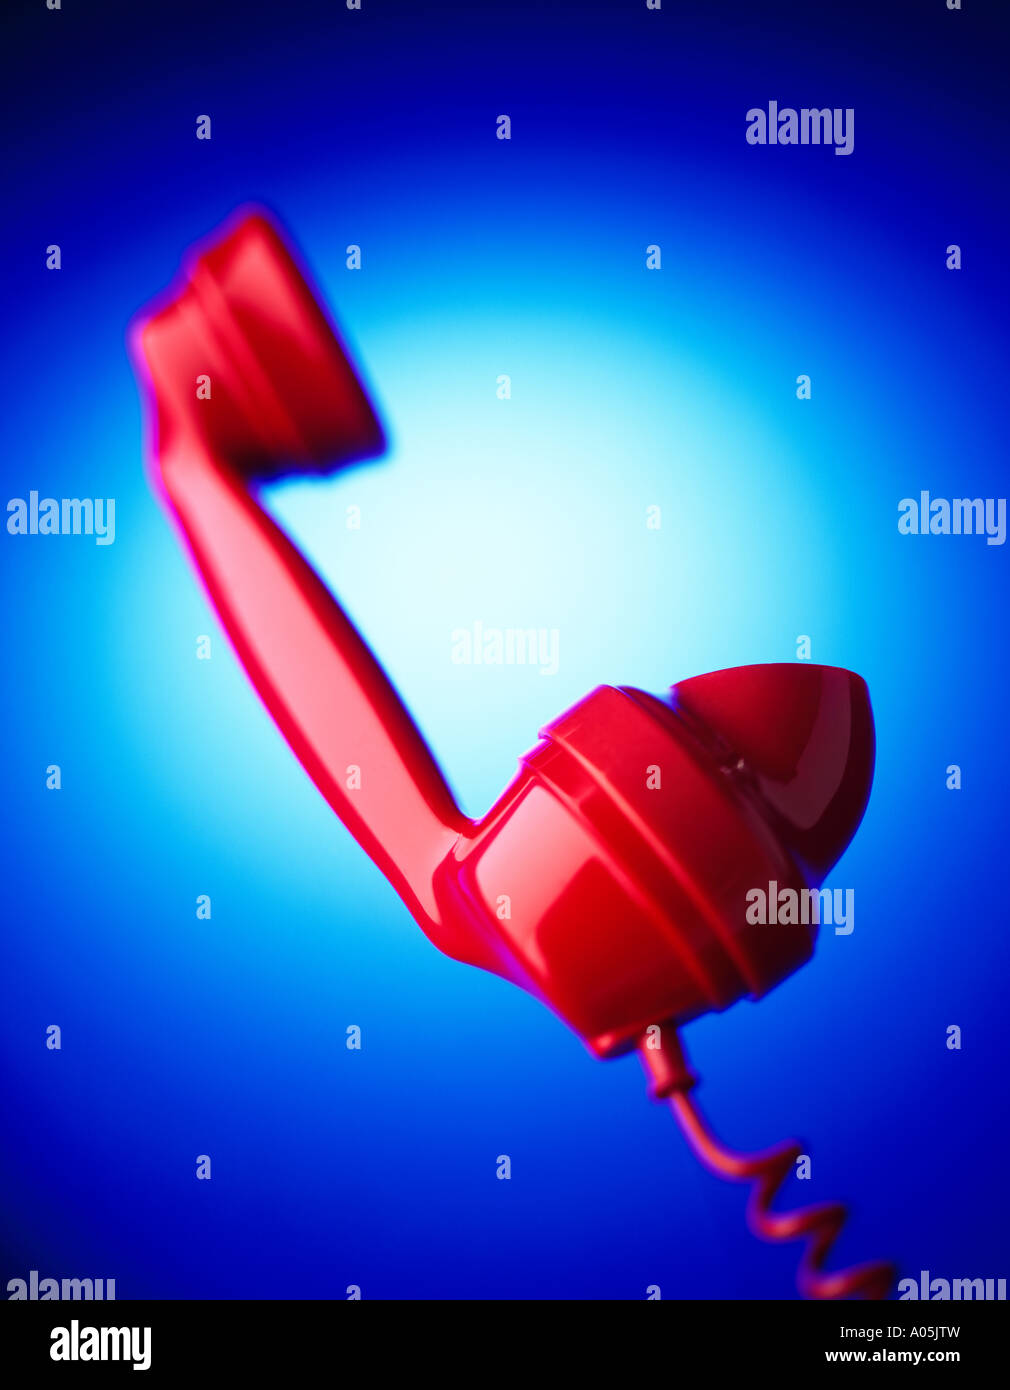 A Red Bakerlite Phone on a blue background Stock Photo